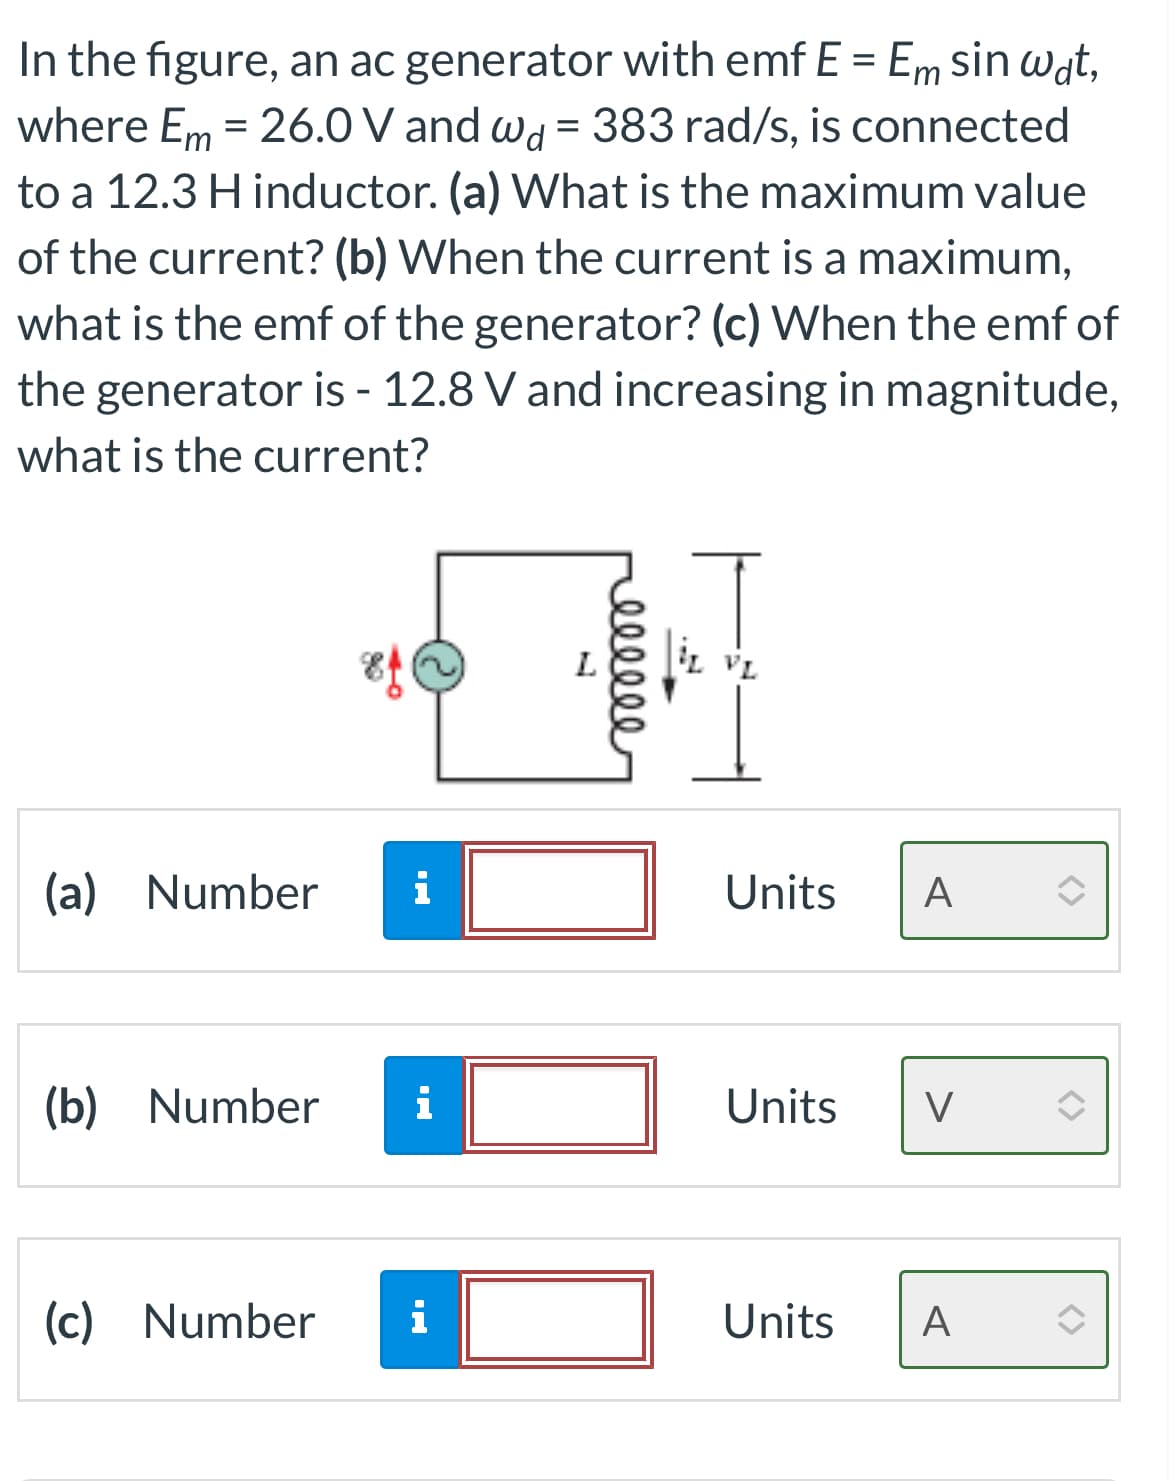 In the figure, an ac generator with emf E = Em sin wat,
where Em = 26.0 V and wd = 383 rad/s, is connected
to a 12.3 H inductor. (a) What is the maximum value
of the current? (b) When the current is a maximum,
what is the emf of the generator? (c) When the emf of
the generator is - 12.8 V and increasing in magnitude,
what is the current?
(a) Number i
(b) Number i
(c) Number
i
ellele
iL VL
Units A
Units V
Units A